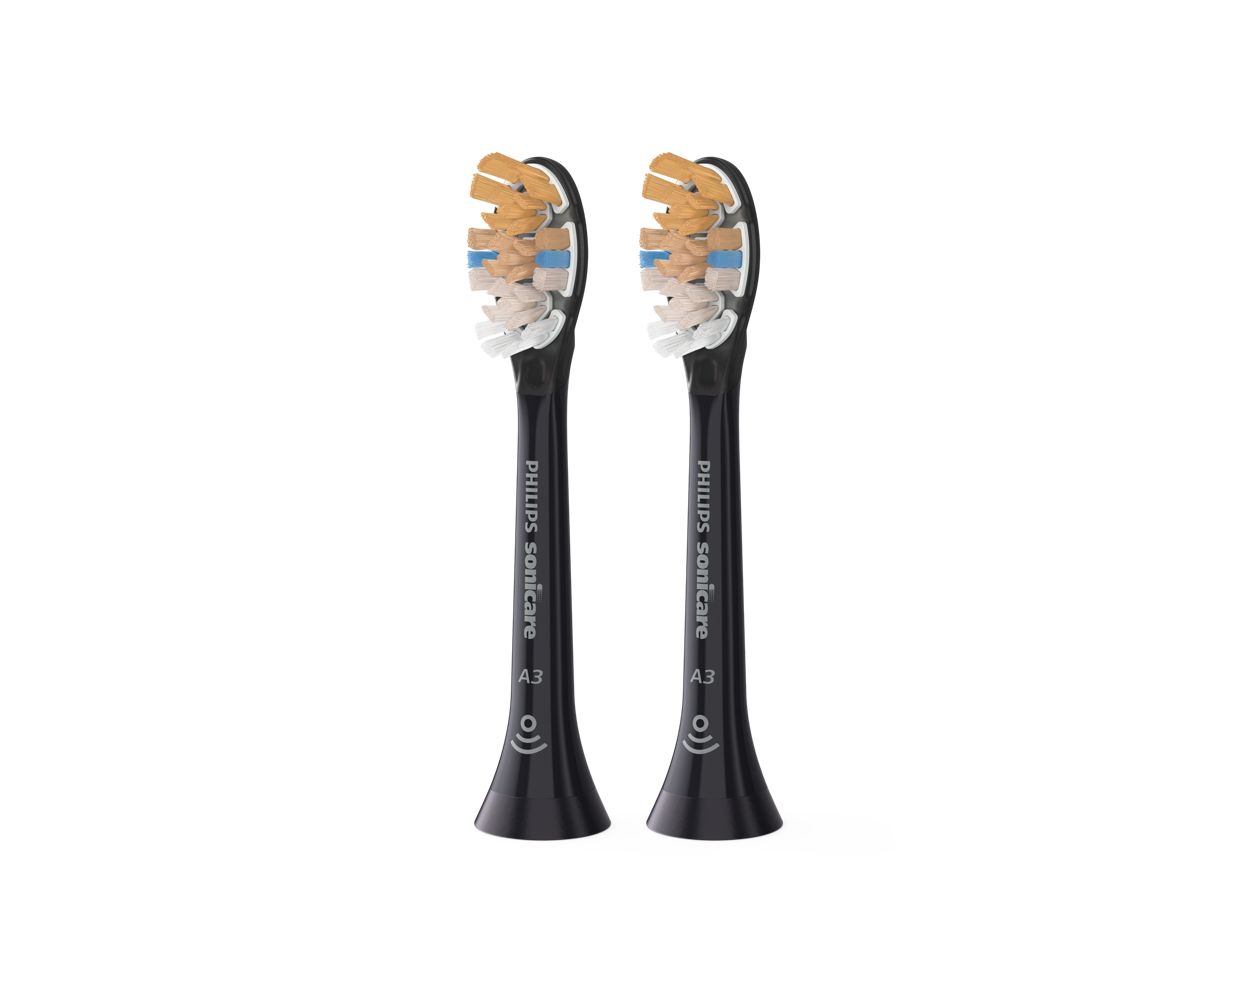 Philips Sonicare A3 Premium All-in-One White Toothbrush Heads